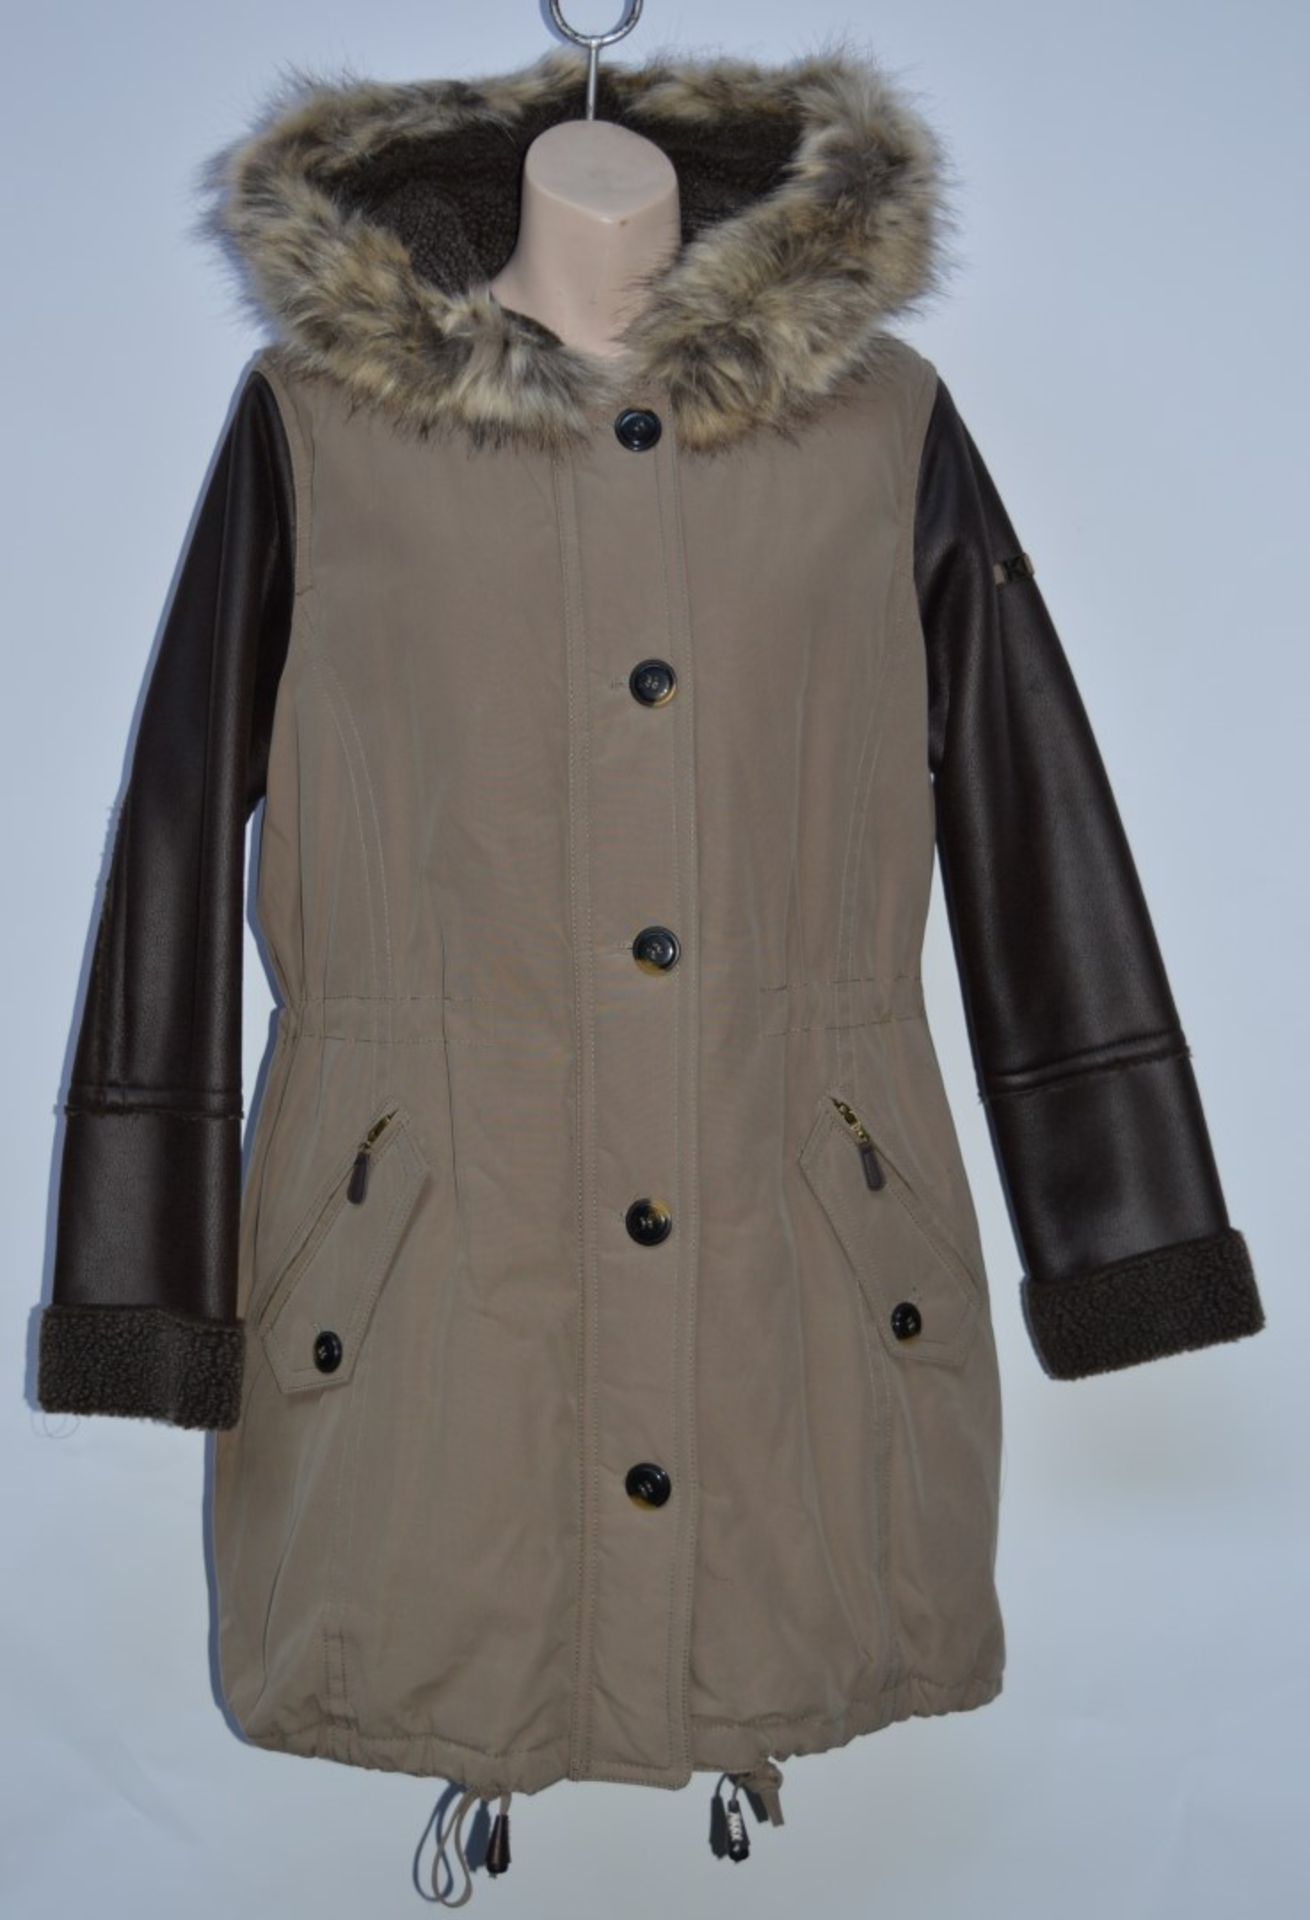 1 x Steilmann KSTN By Kirsten Womens Parker Coat - Hard Wearing Coat With Faux Leather Arms,,